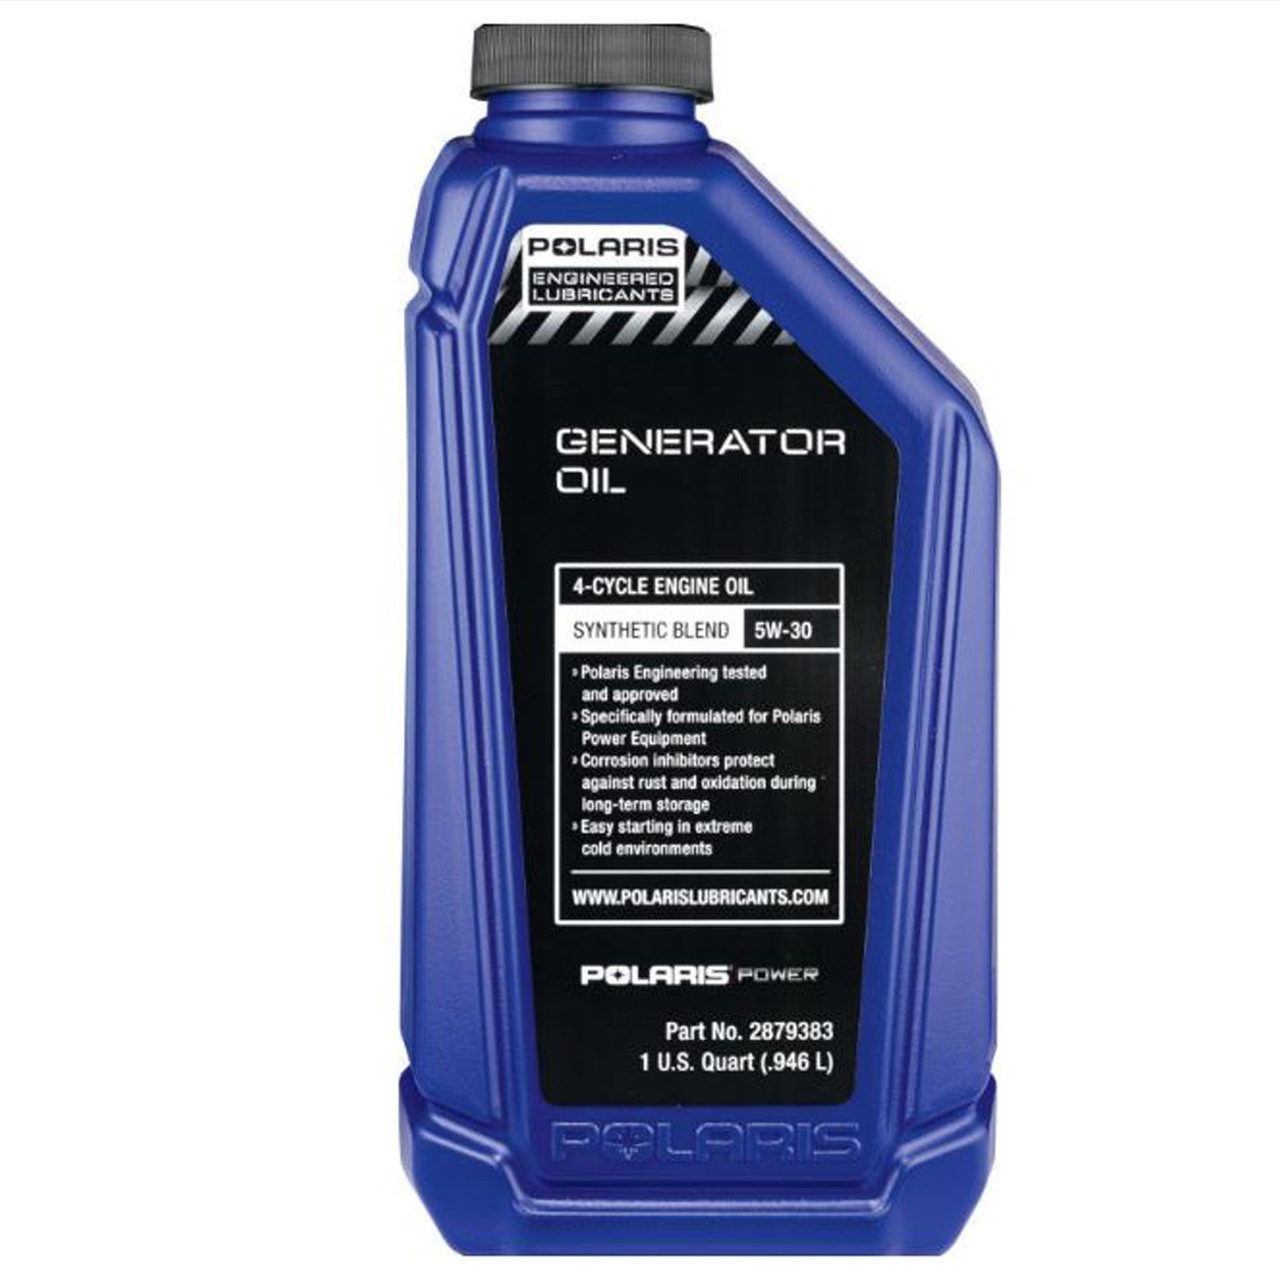 Polaris New OEM Synthetic Blend 4-Cycle Engine Generator Oil, SAE 5W-30, 2879383